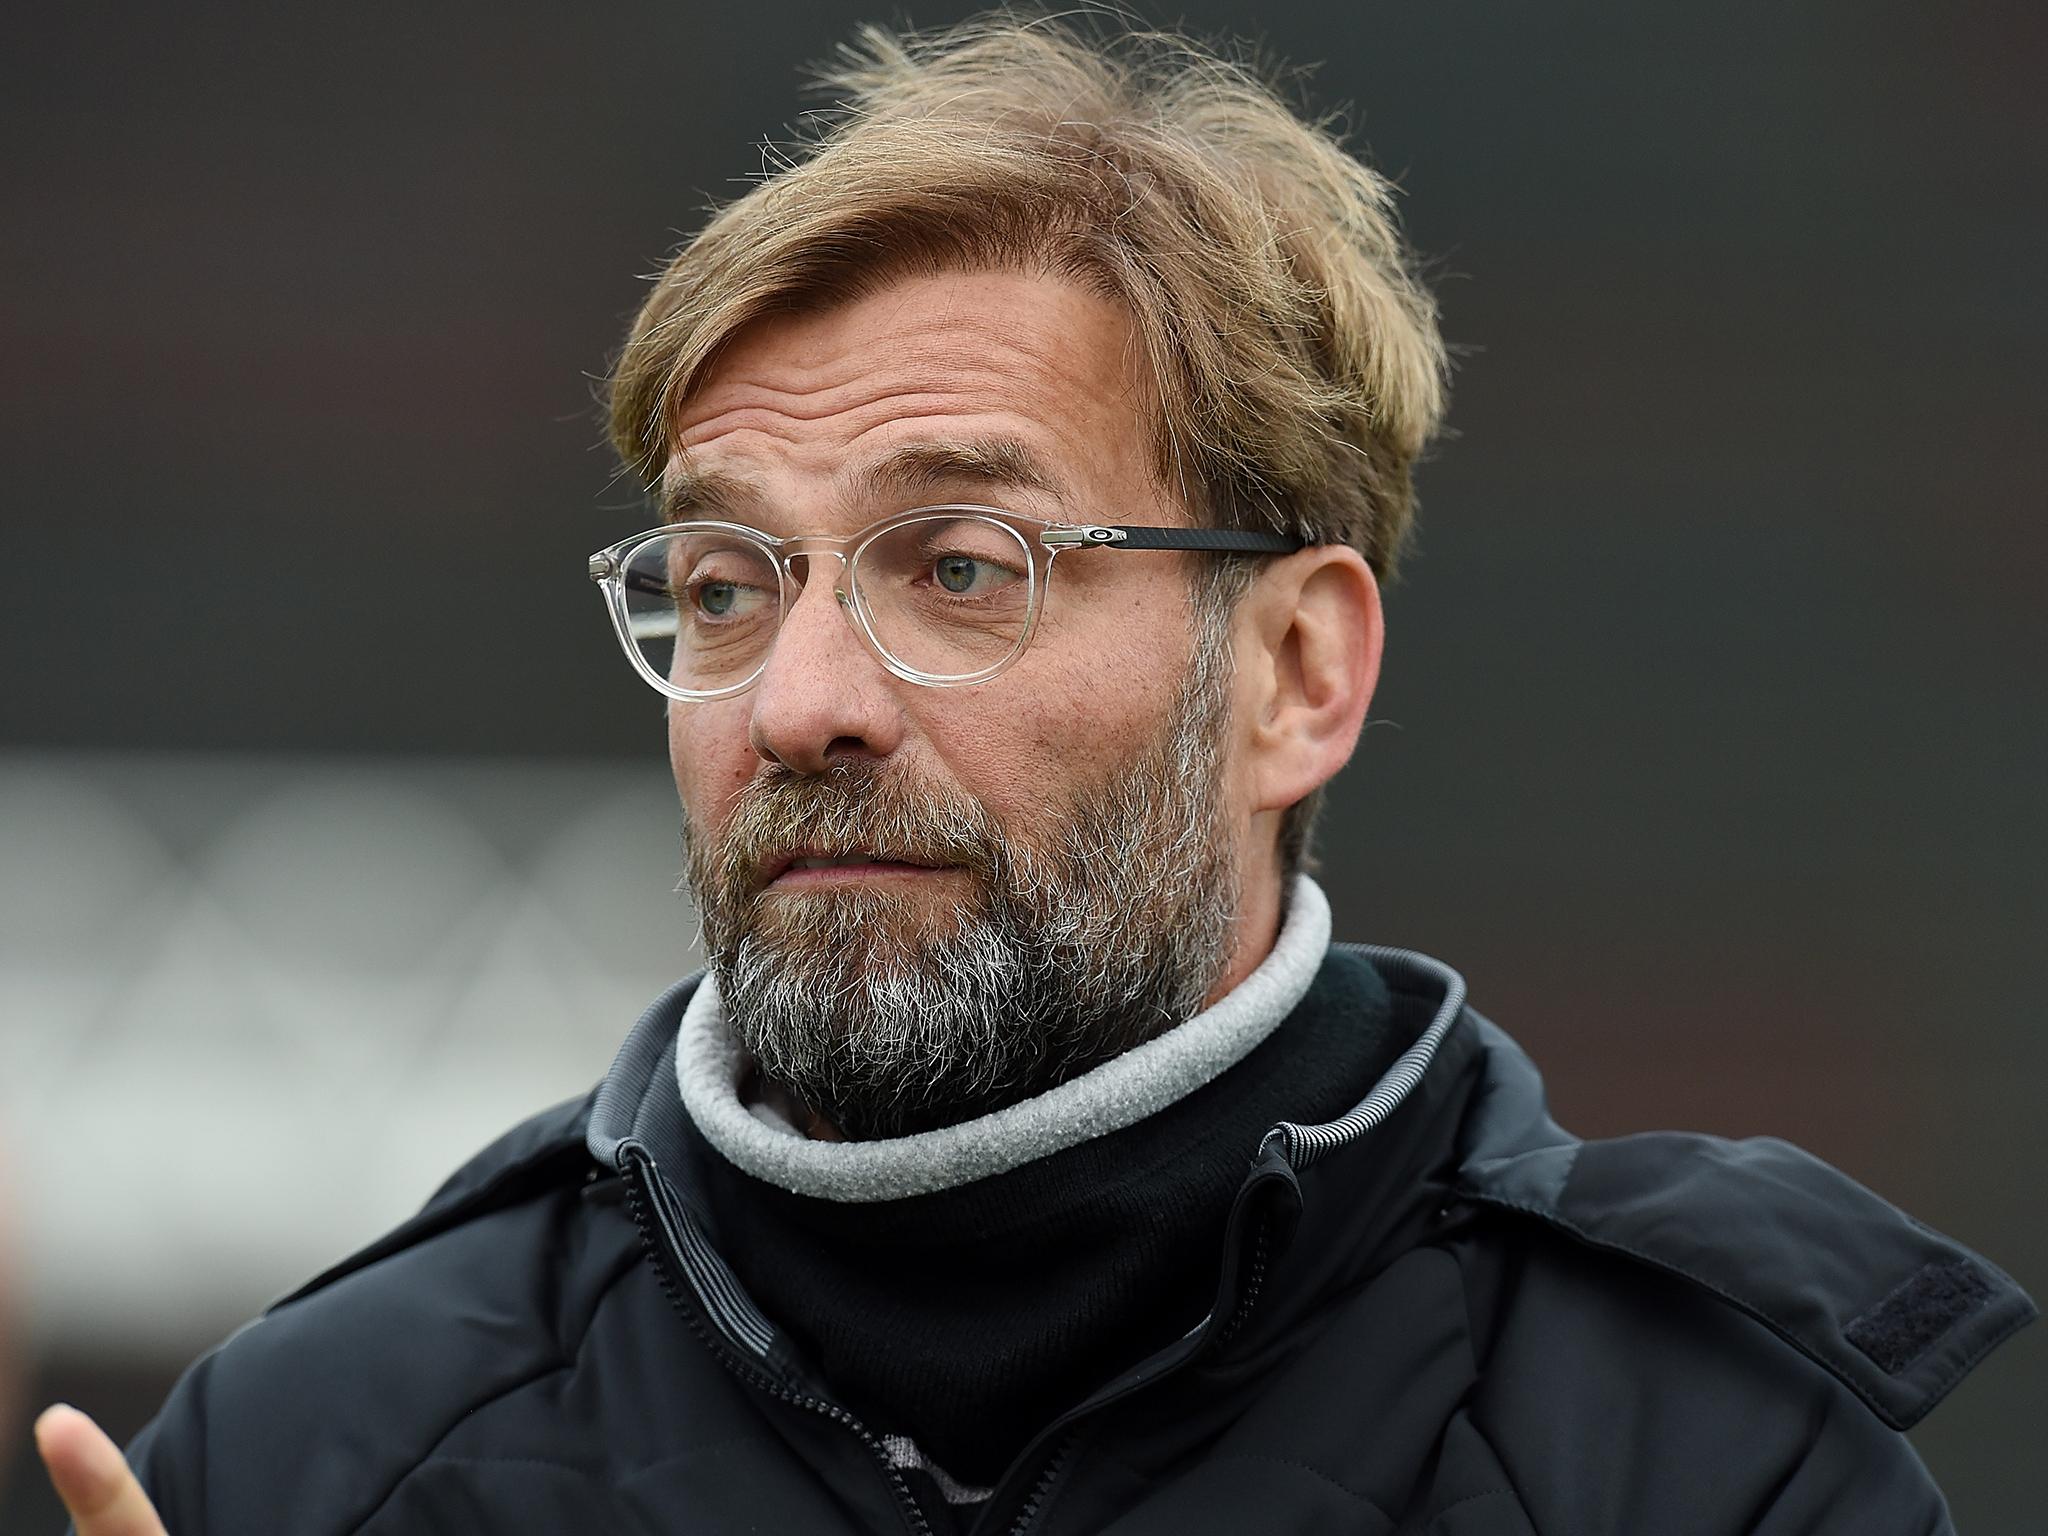 Jürgen Klopp does not believe facing Roma is an easier task for Liverpool than either Real Madrid or Bayern Munich